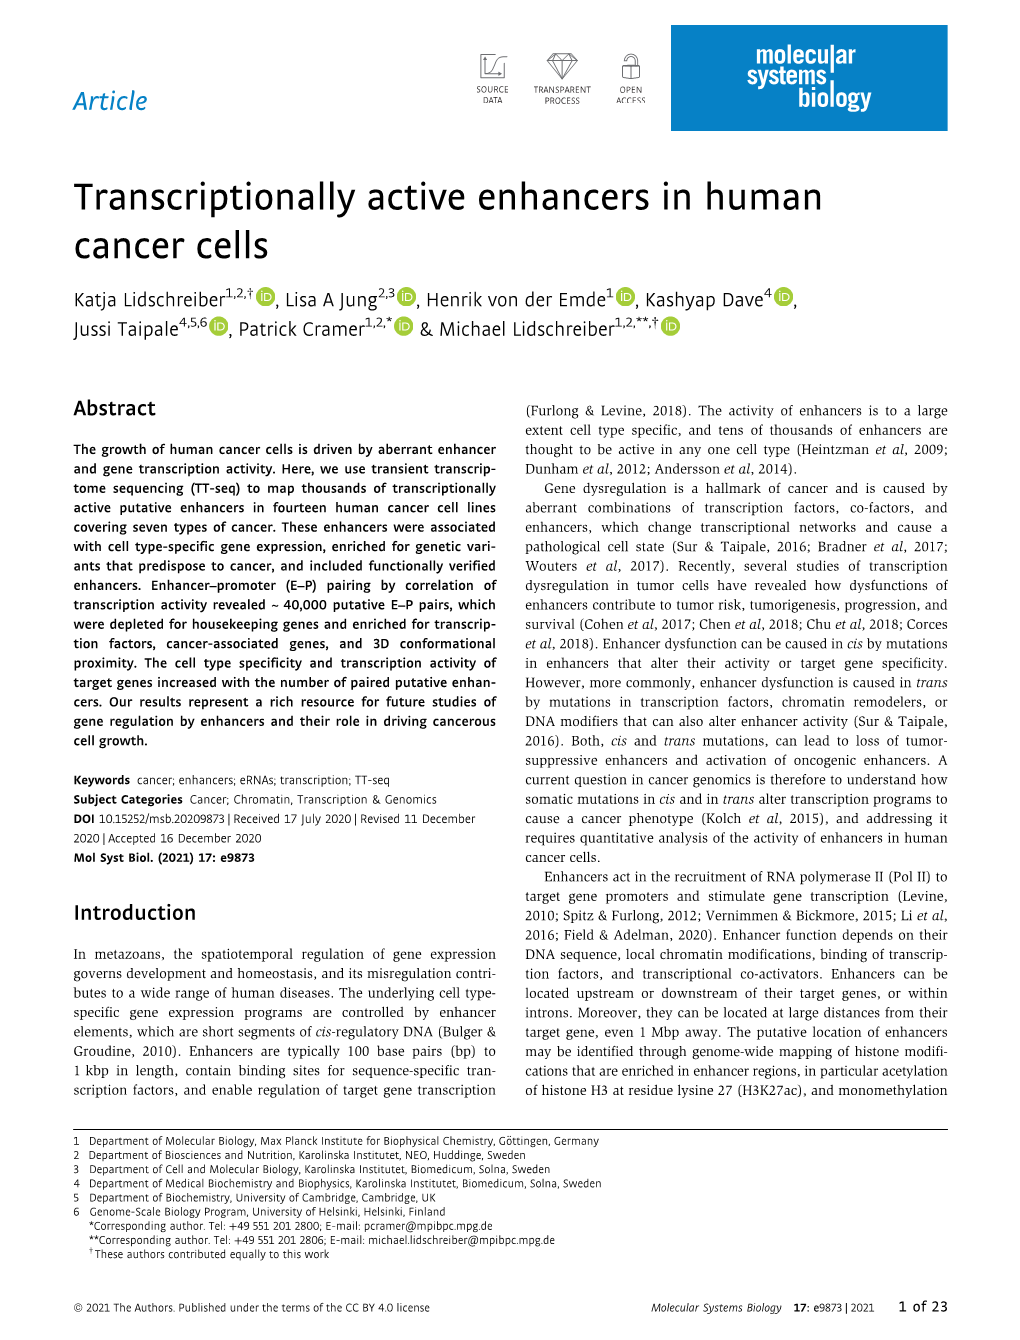 Transcriptionally Active Enhancers in Human Cancer Cells